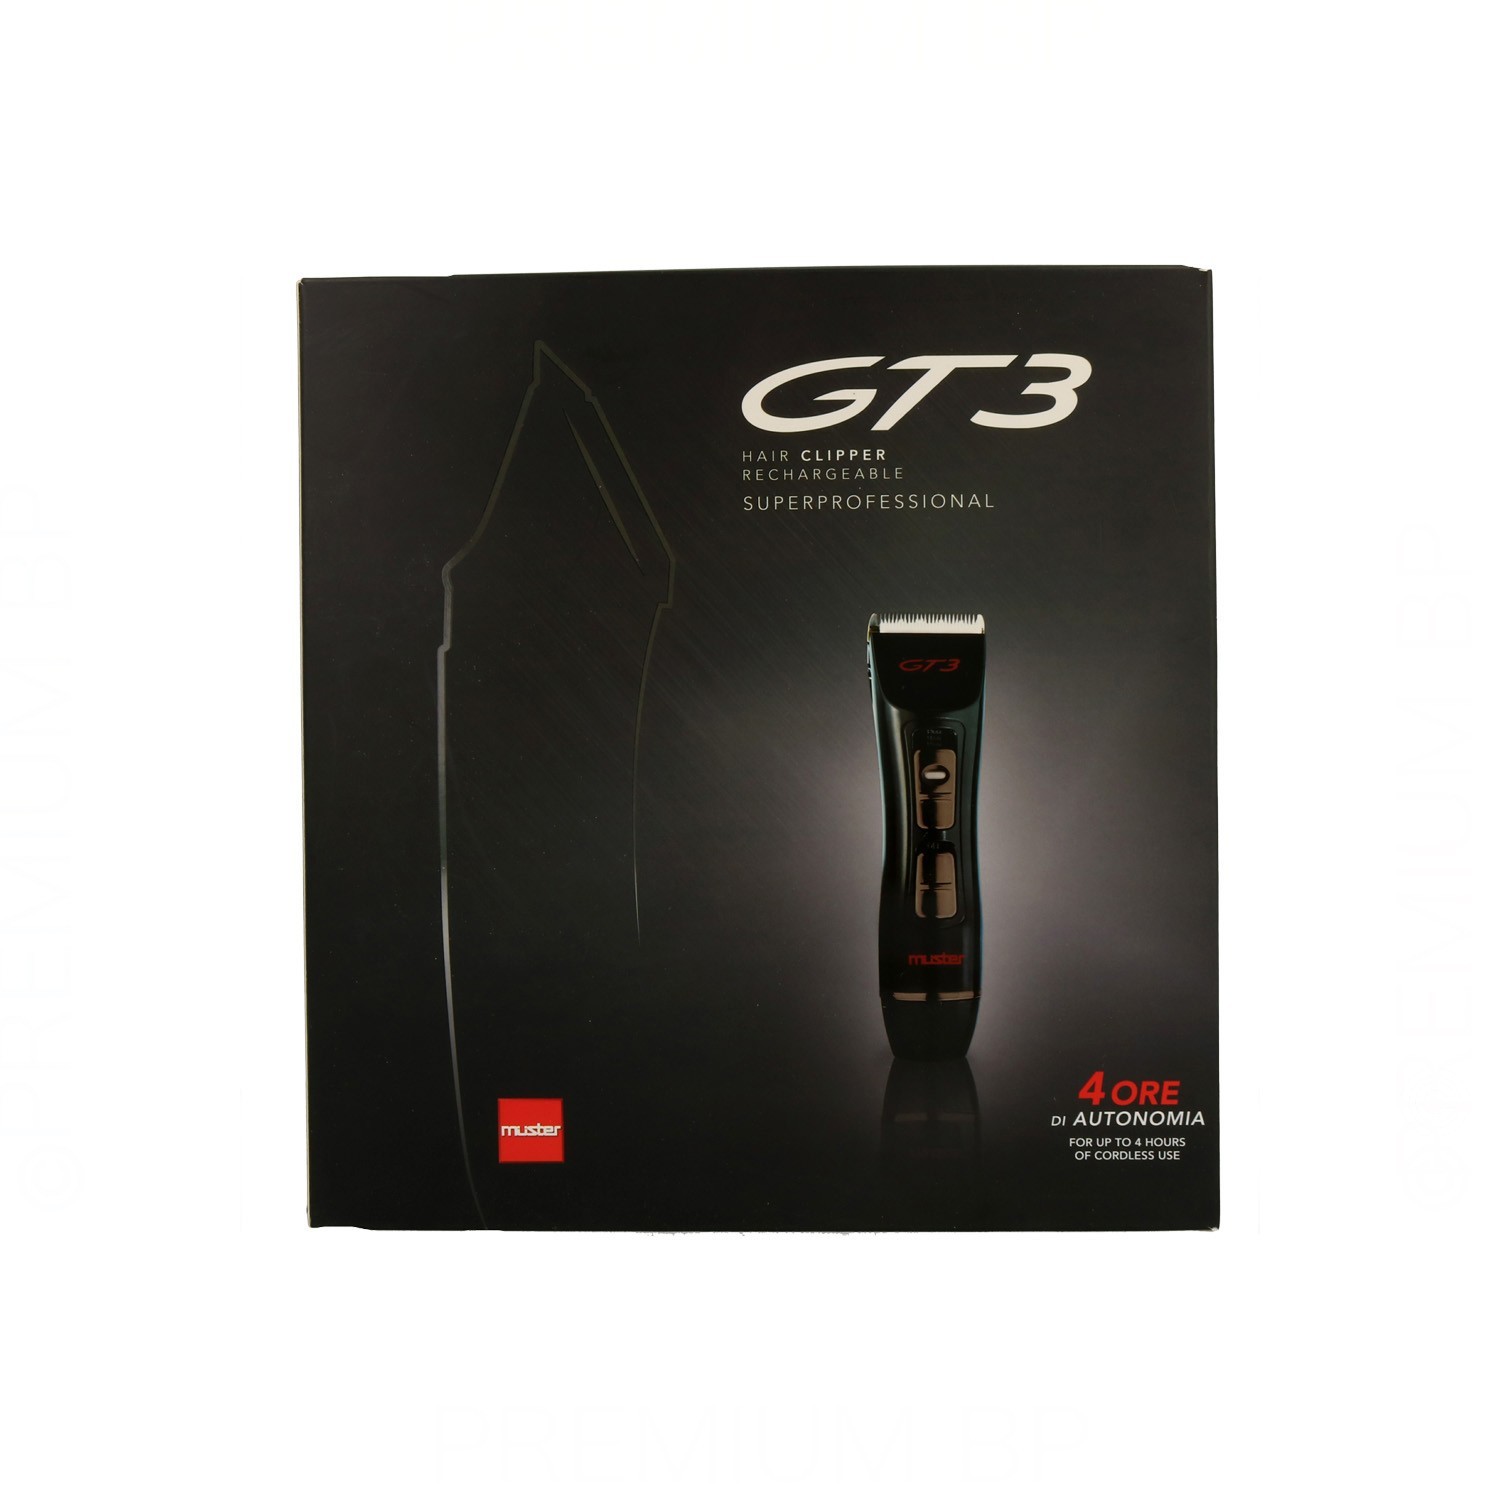 Muster GT3 Hair Clipper Black Rechargeable Machine (57013)